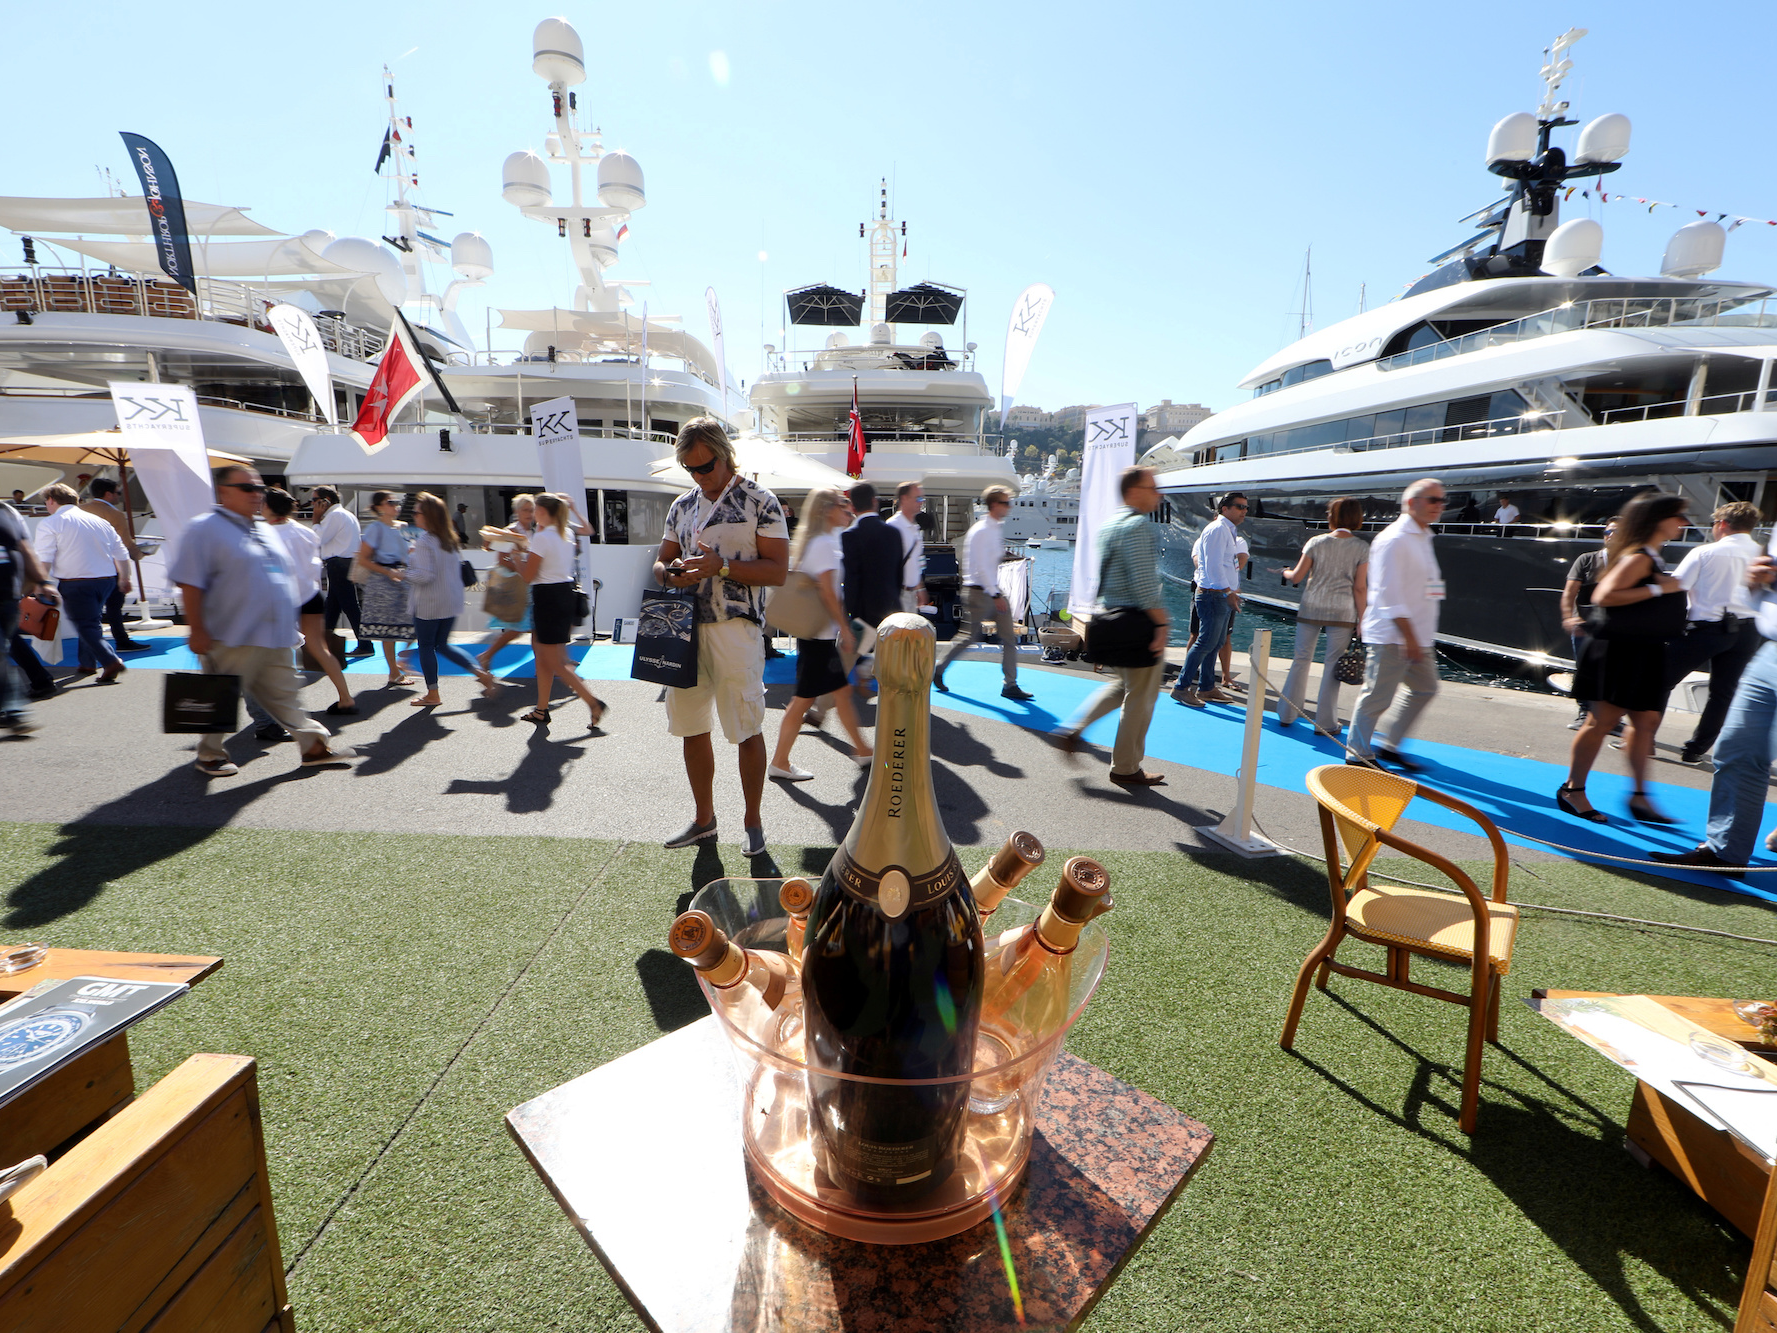 Visitors walk past luxury boats as they attend the 26th Monaco Yacht show.